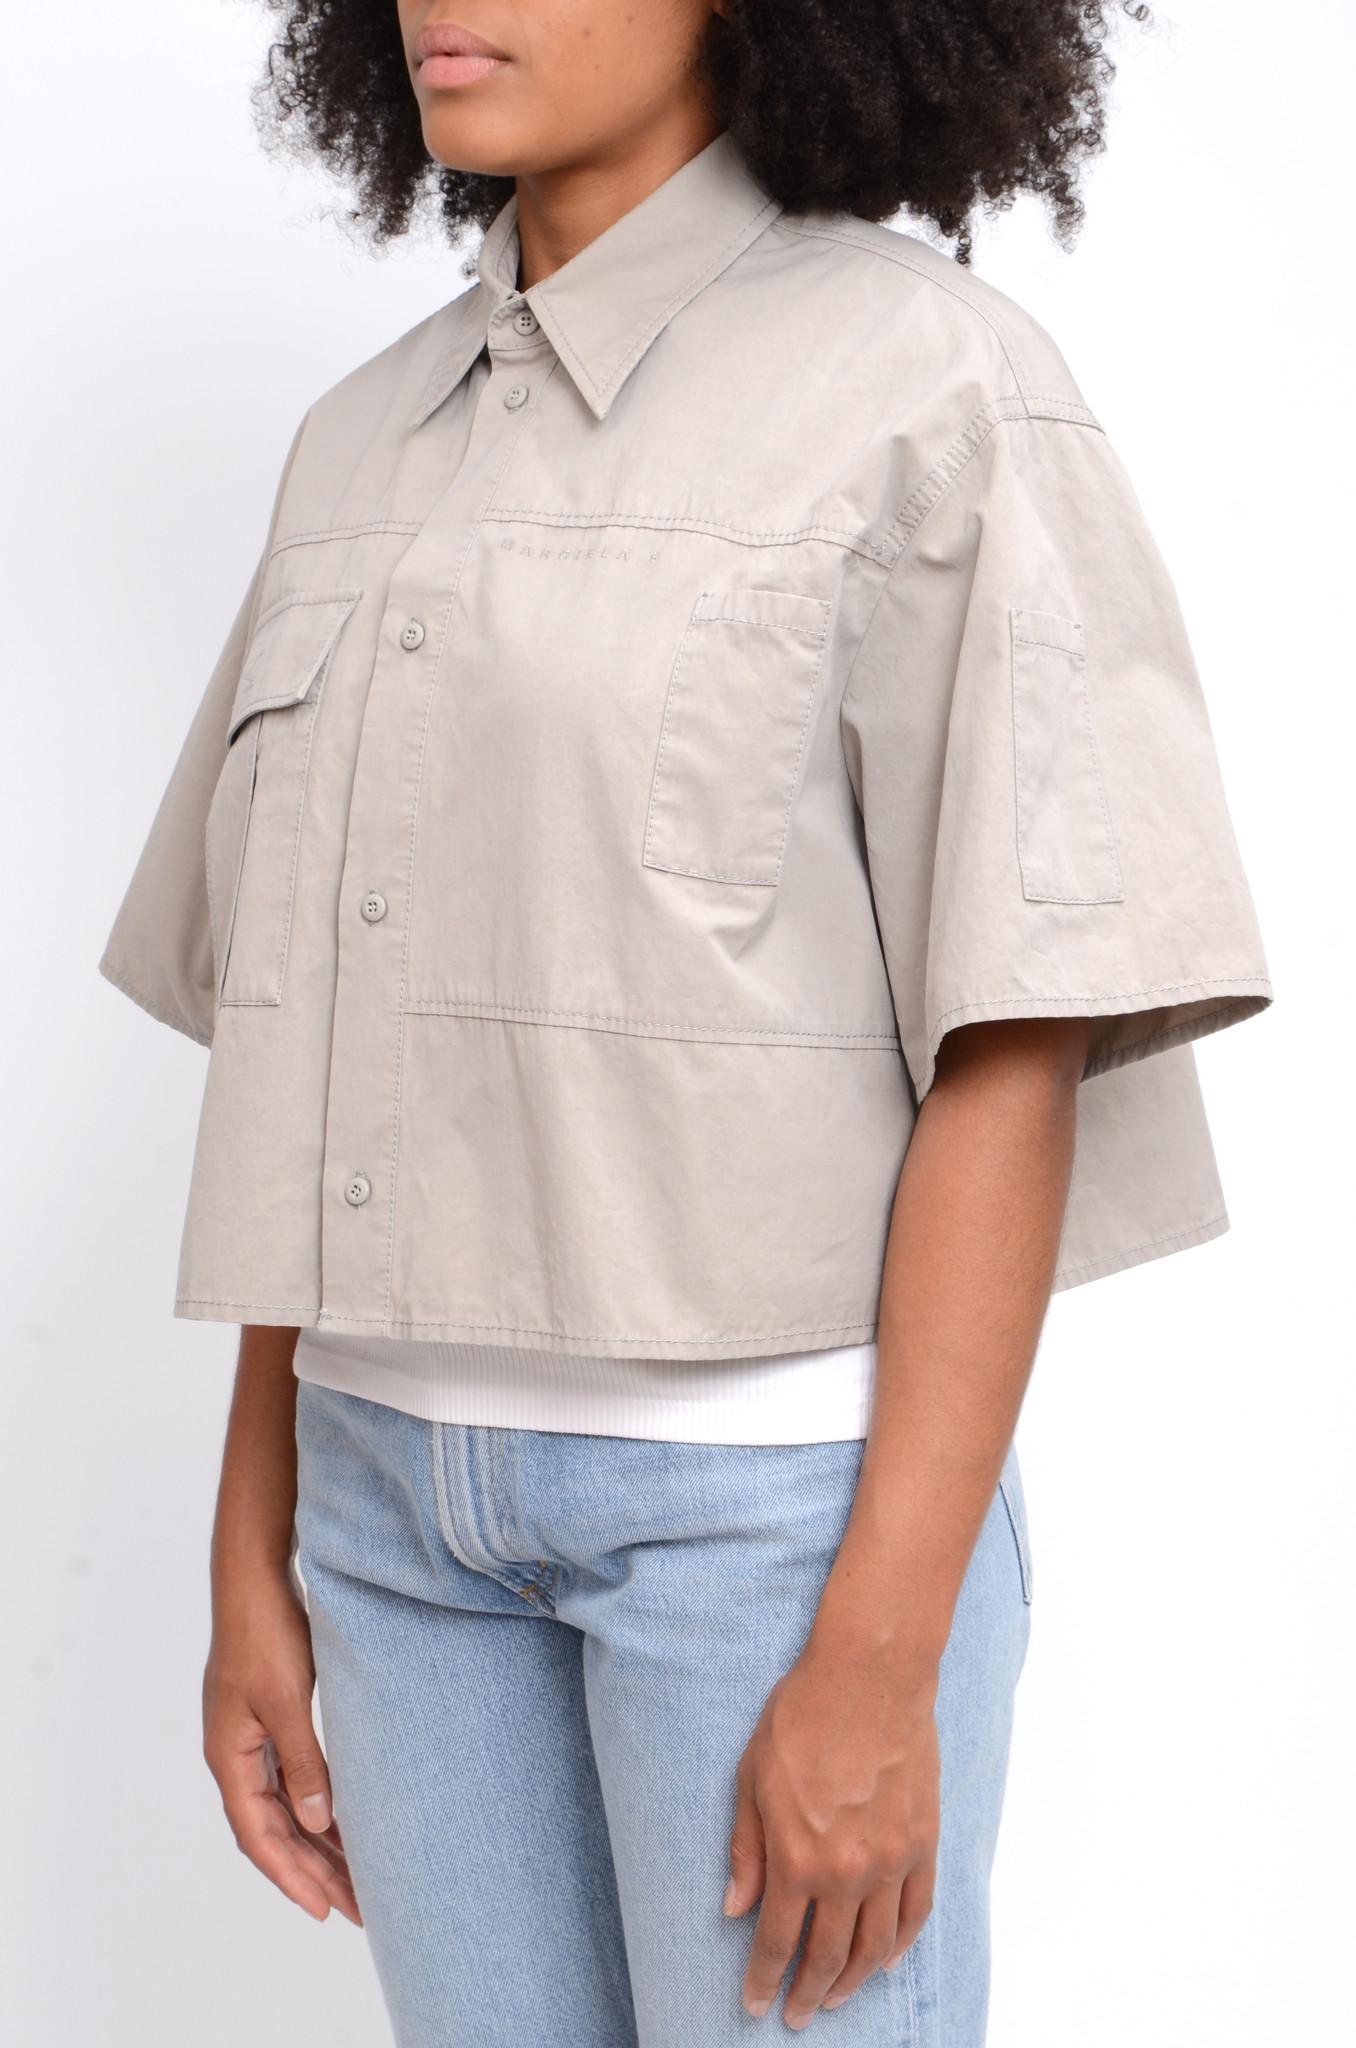 CROPPED MILITARY SHIRT JACKET IN GREY-4